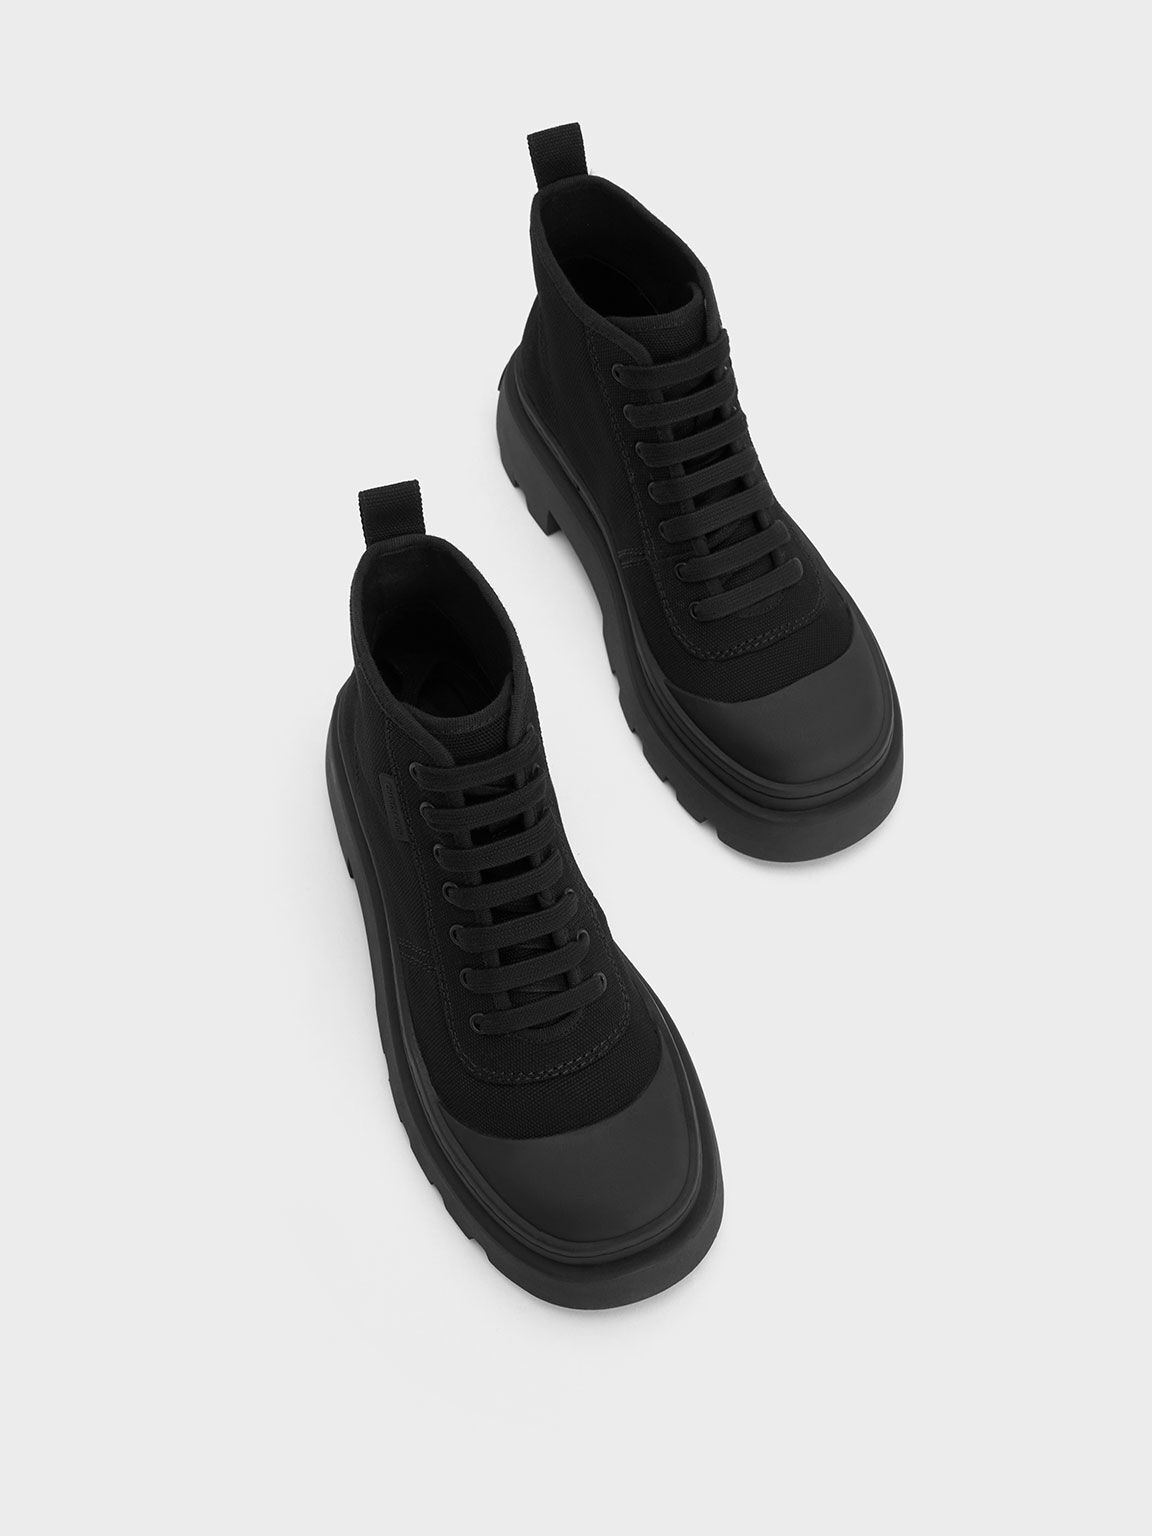 Black Canvas High-Top Sneakers - CHARLES & KEITH MX